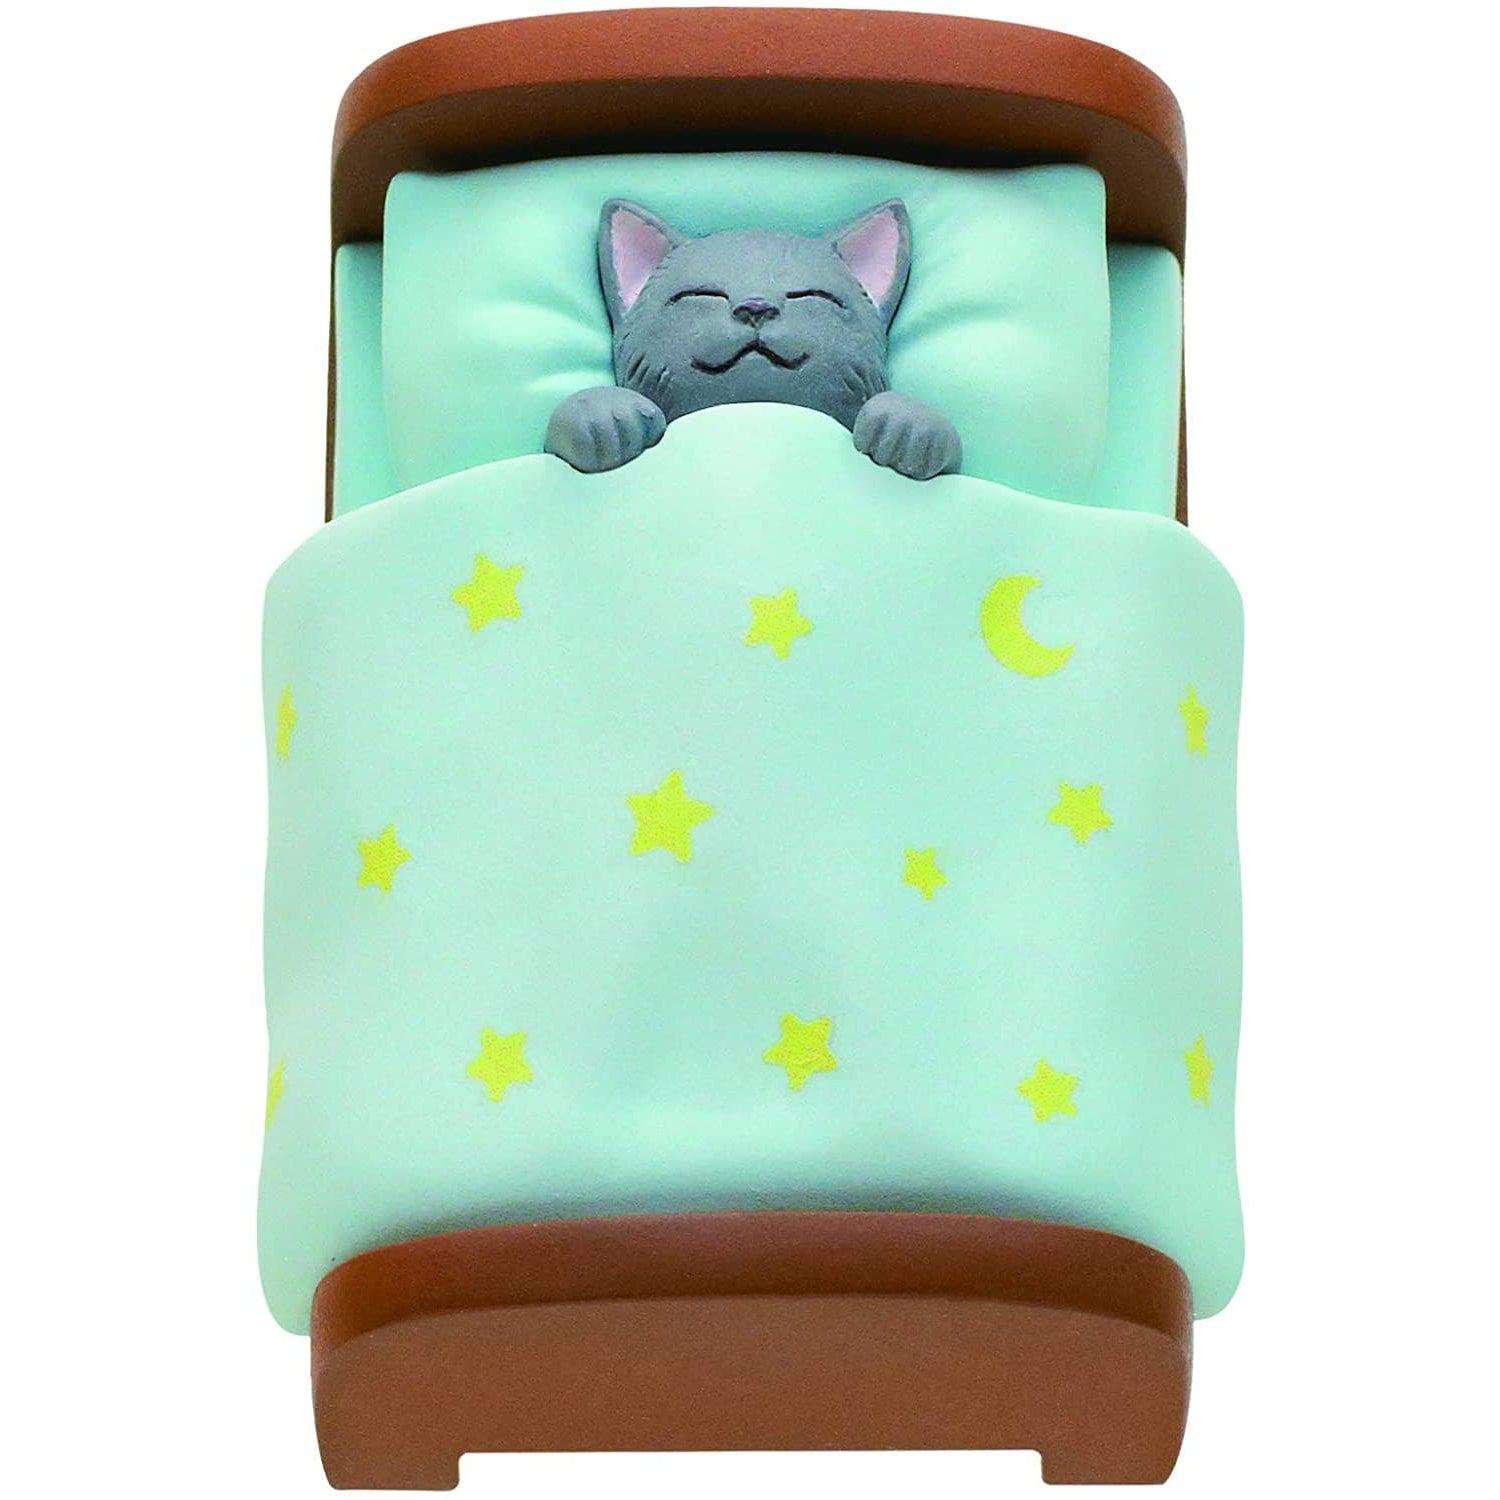 Clever Idiots-Kitan Club - Cat in a Bed Blind Box - Assorted Styles-KC-056-Legacy Toys